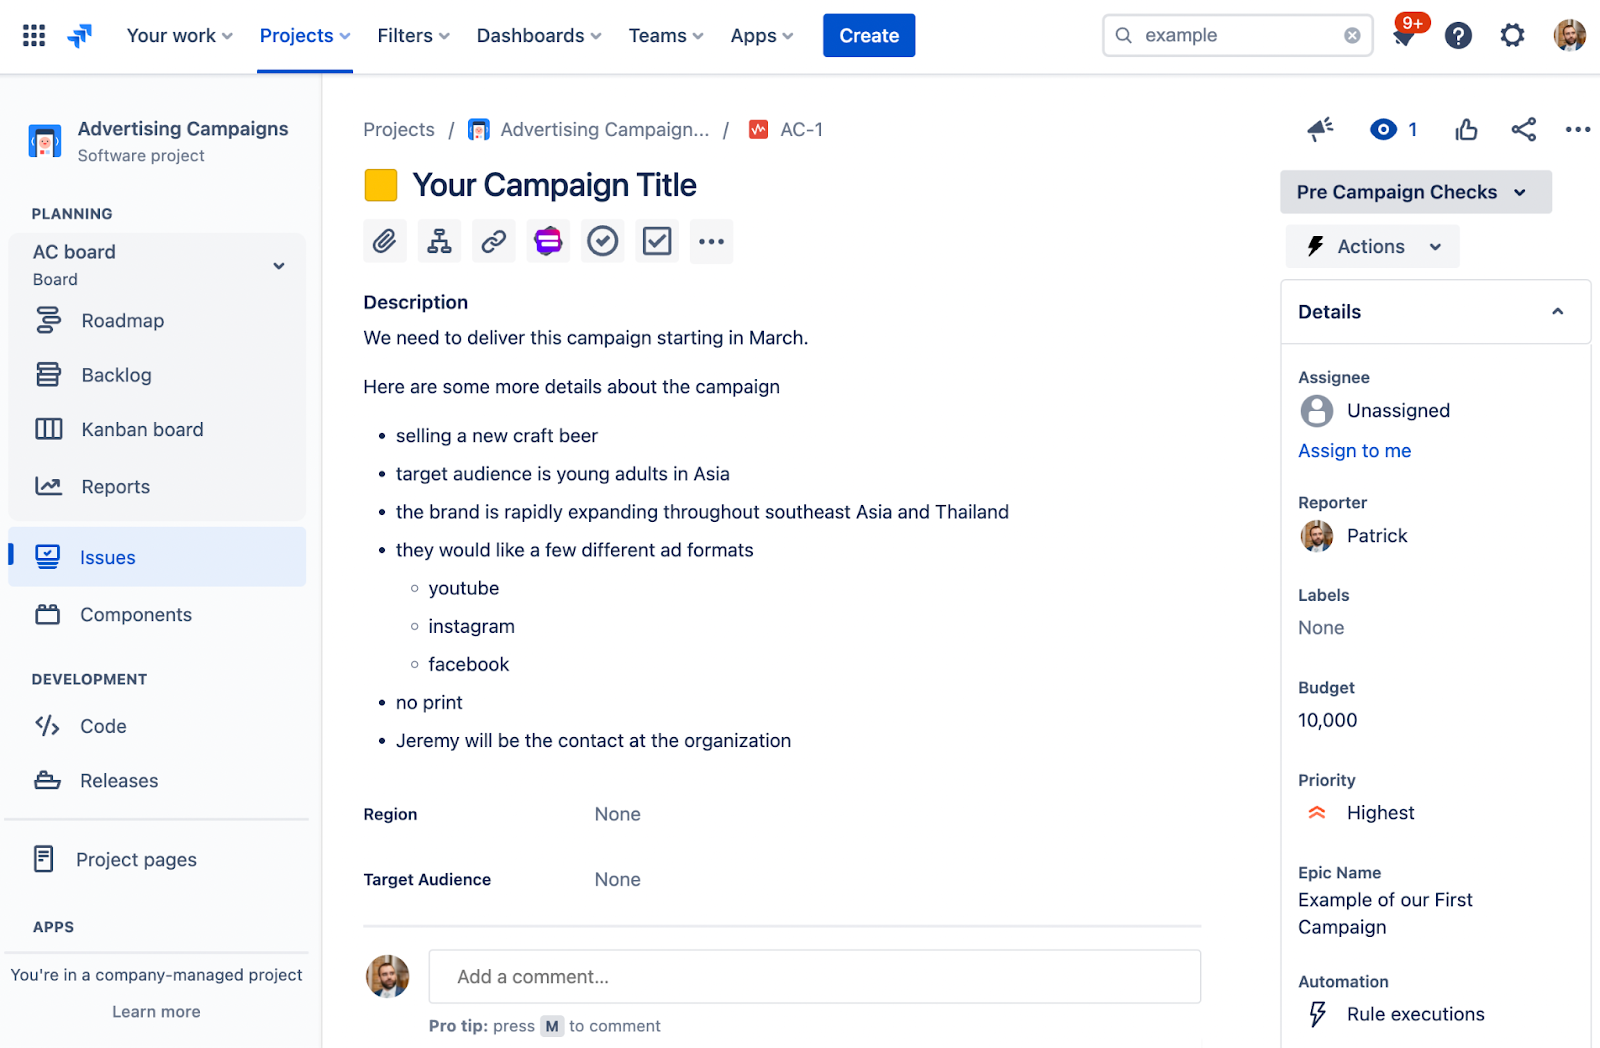 Templating.app - Standard approach to creating (social) media - example of social media campaign setup with default Jira issues